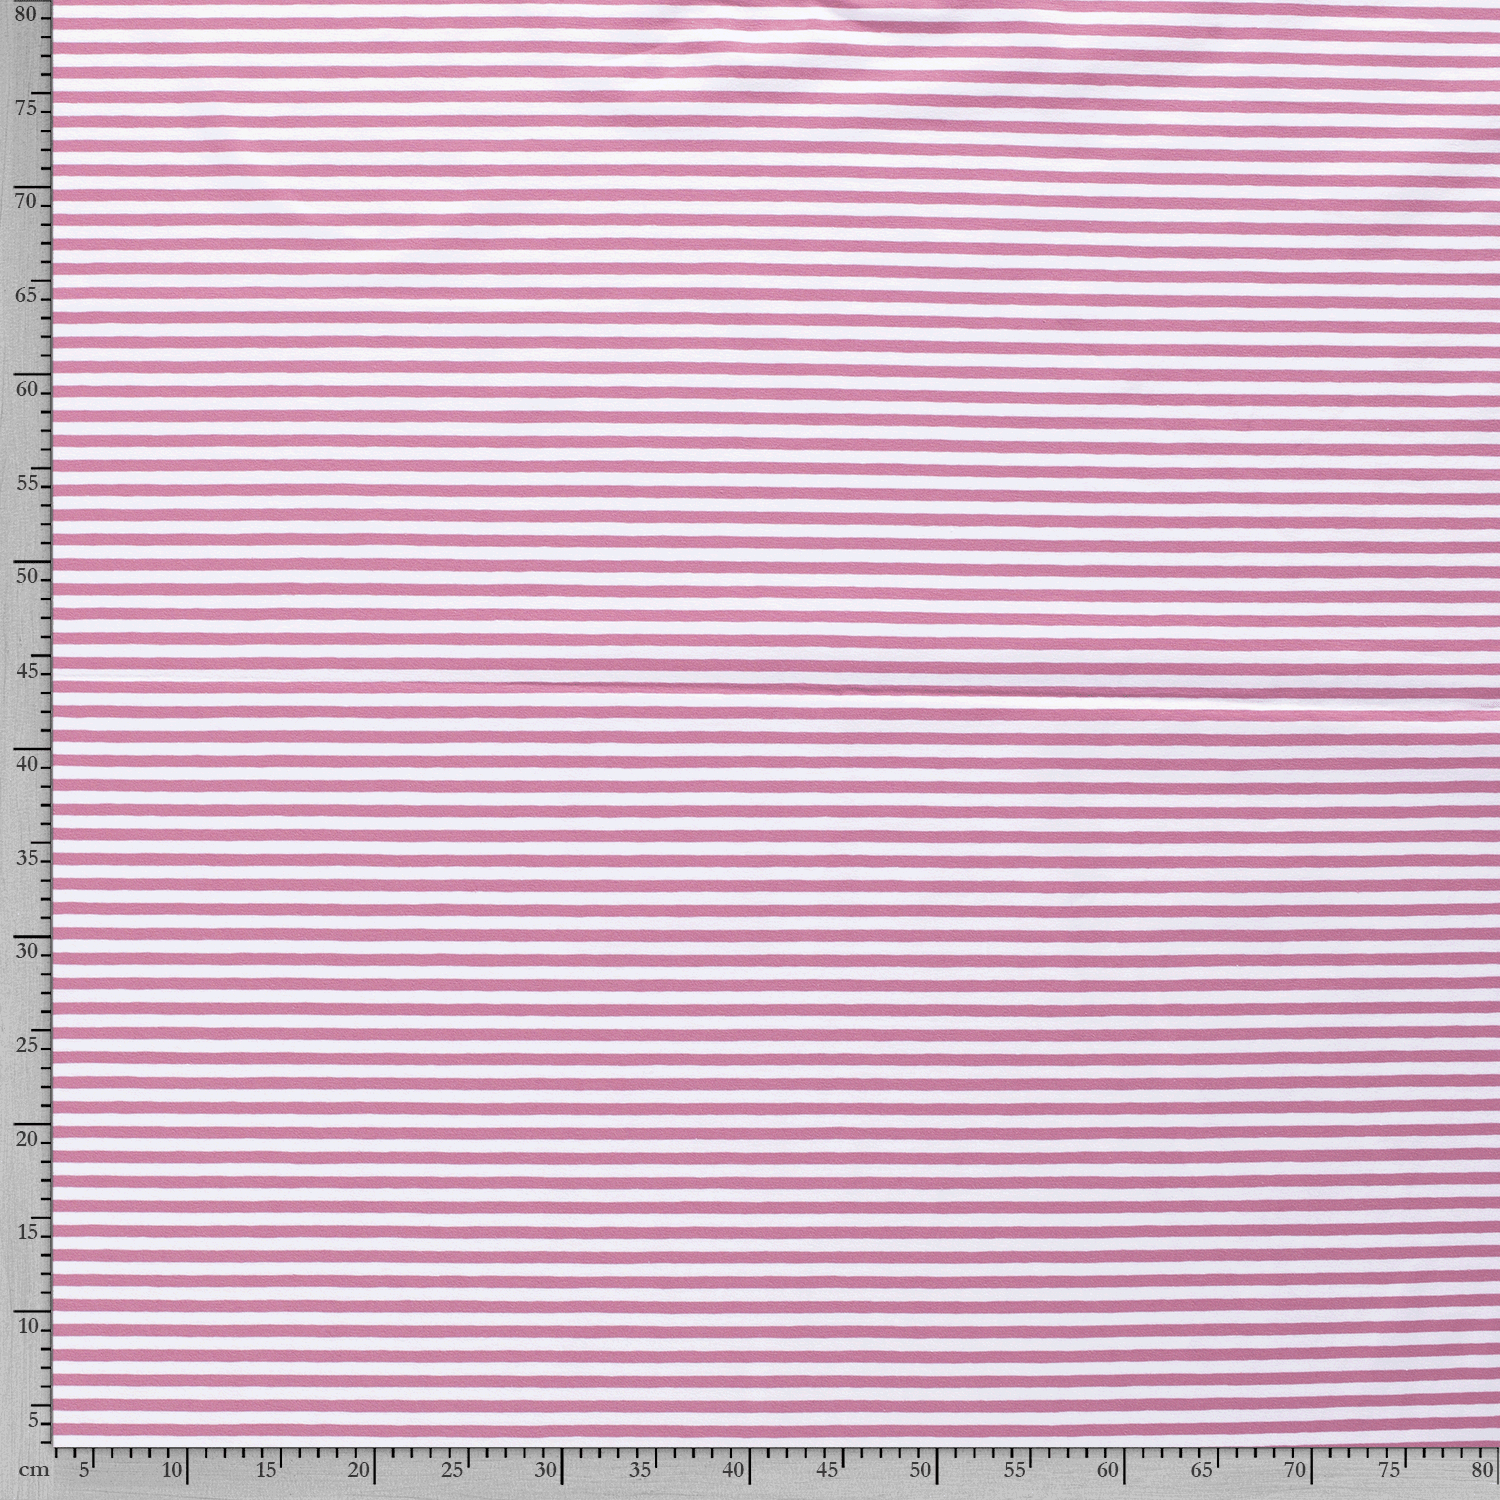 Cotton Jersey Fabric - Old Pink with White Stripes-Jersey Fabric-Jelly Fabrics